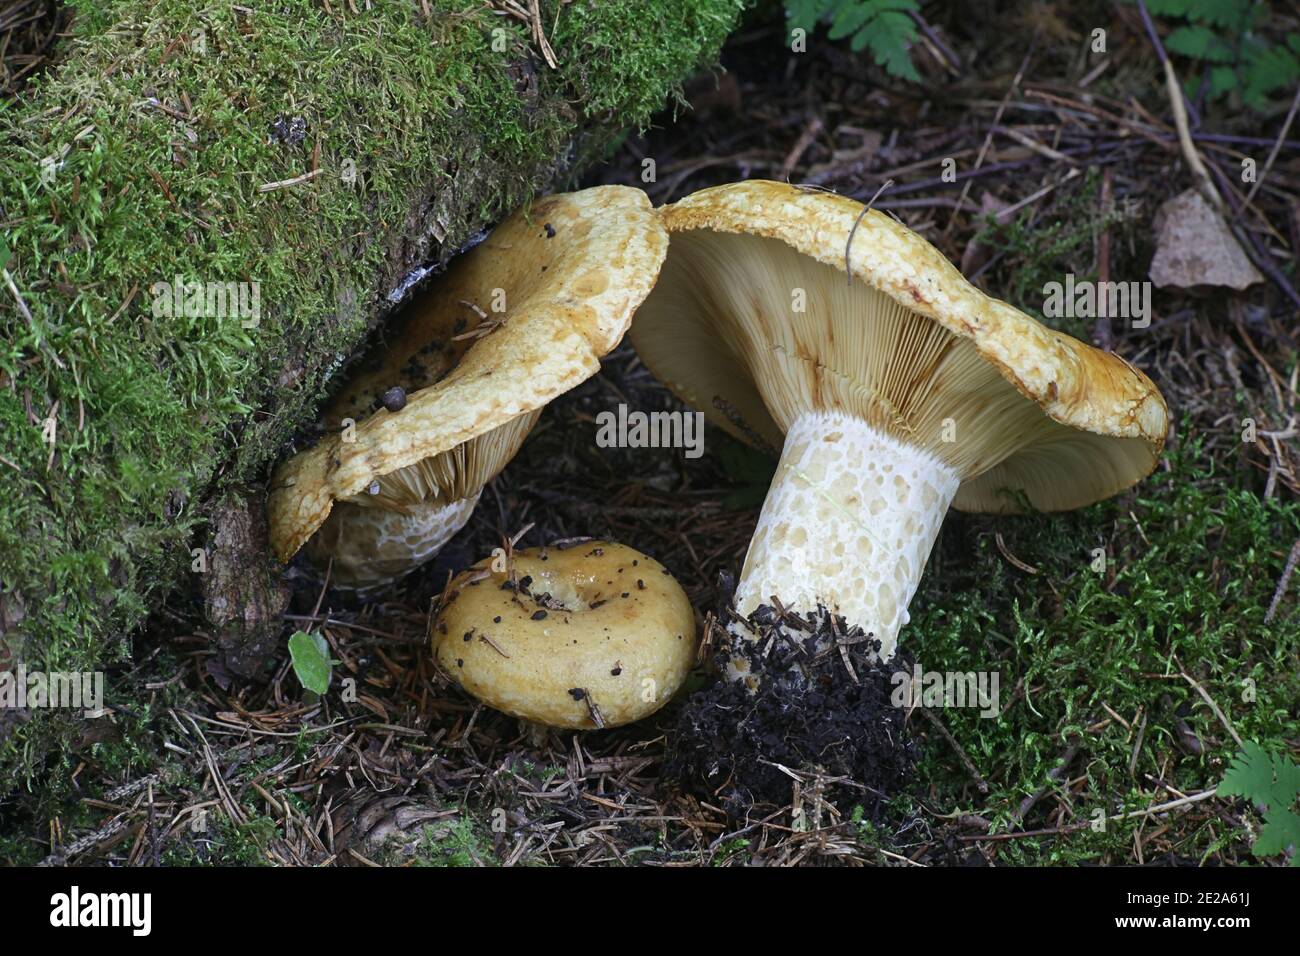 Lactifluus scrobiculatus, also known as Lactarius scrobiculatus, commonly called the spotted milkcap, wild mushroom from Finland Stock Photo